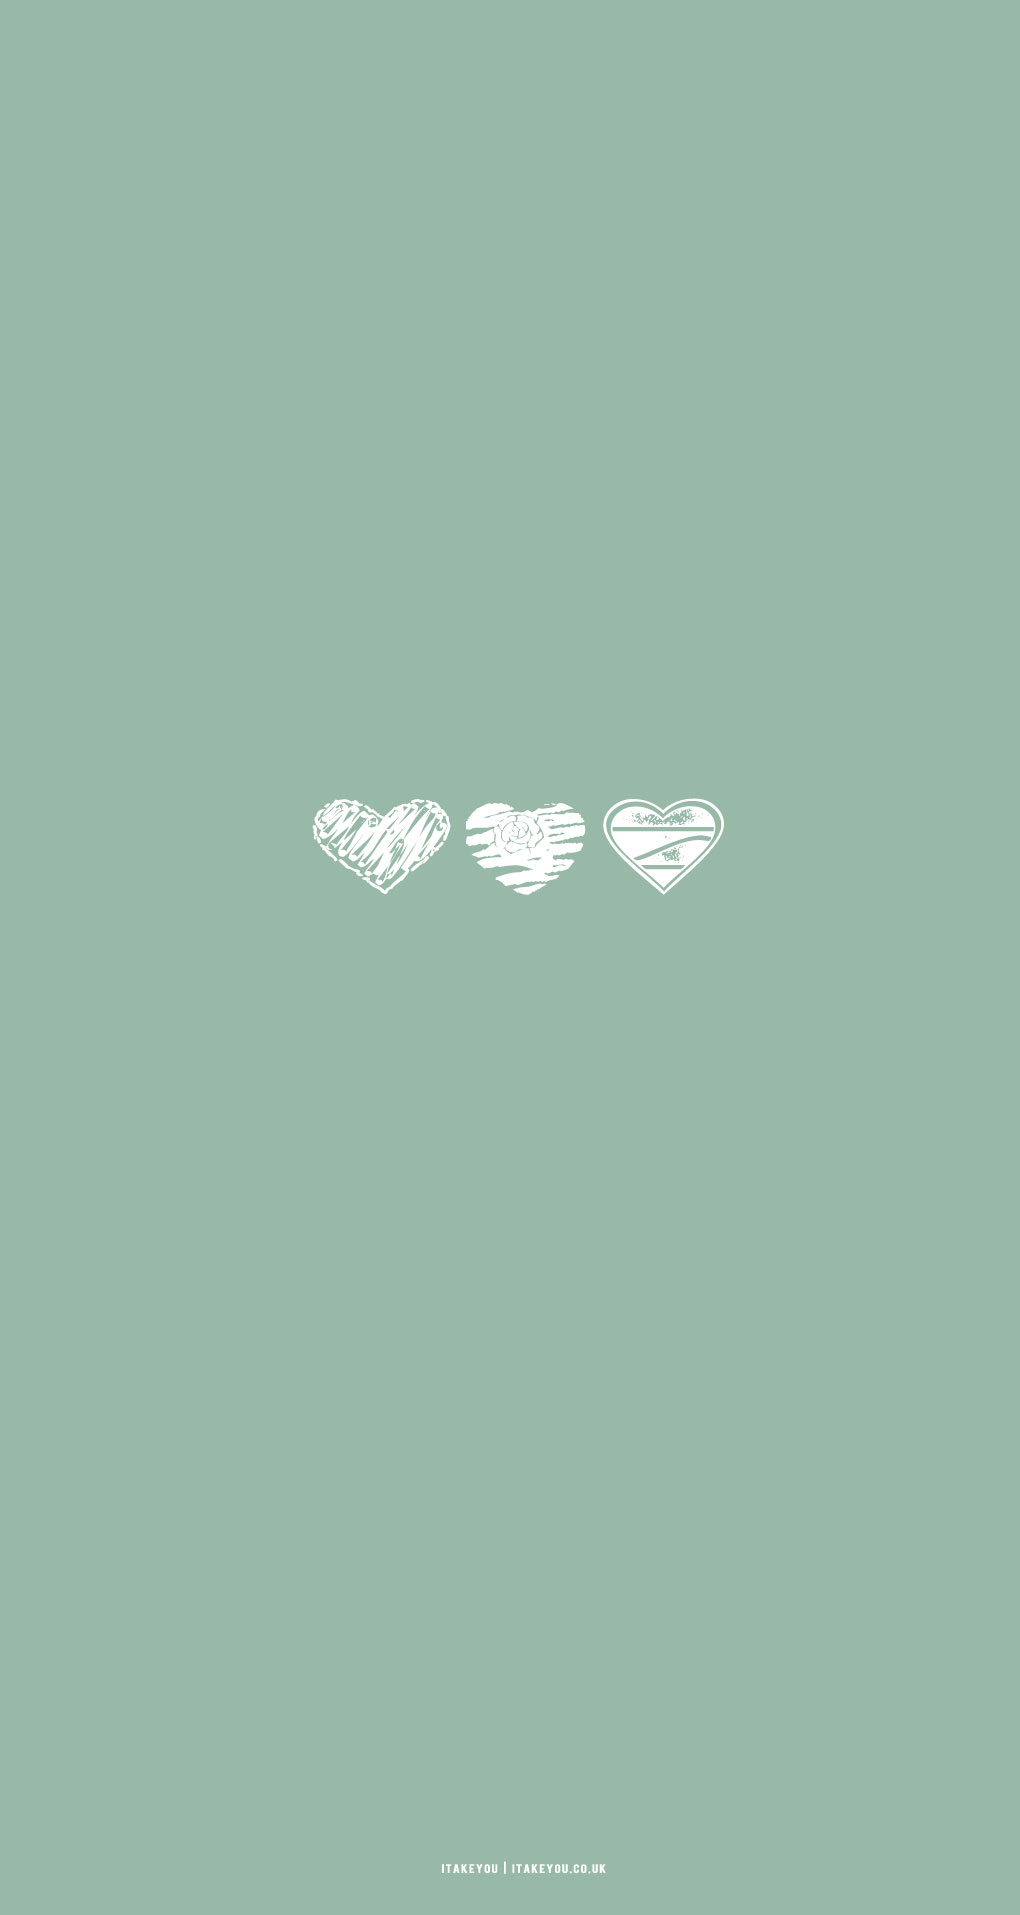 Sage Green Minimalist Wallpaper for Phone, Different Hearts I Take You. Wedding Readings. Wedding Ideas